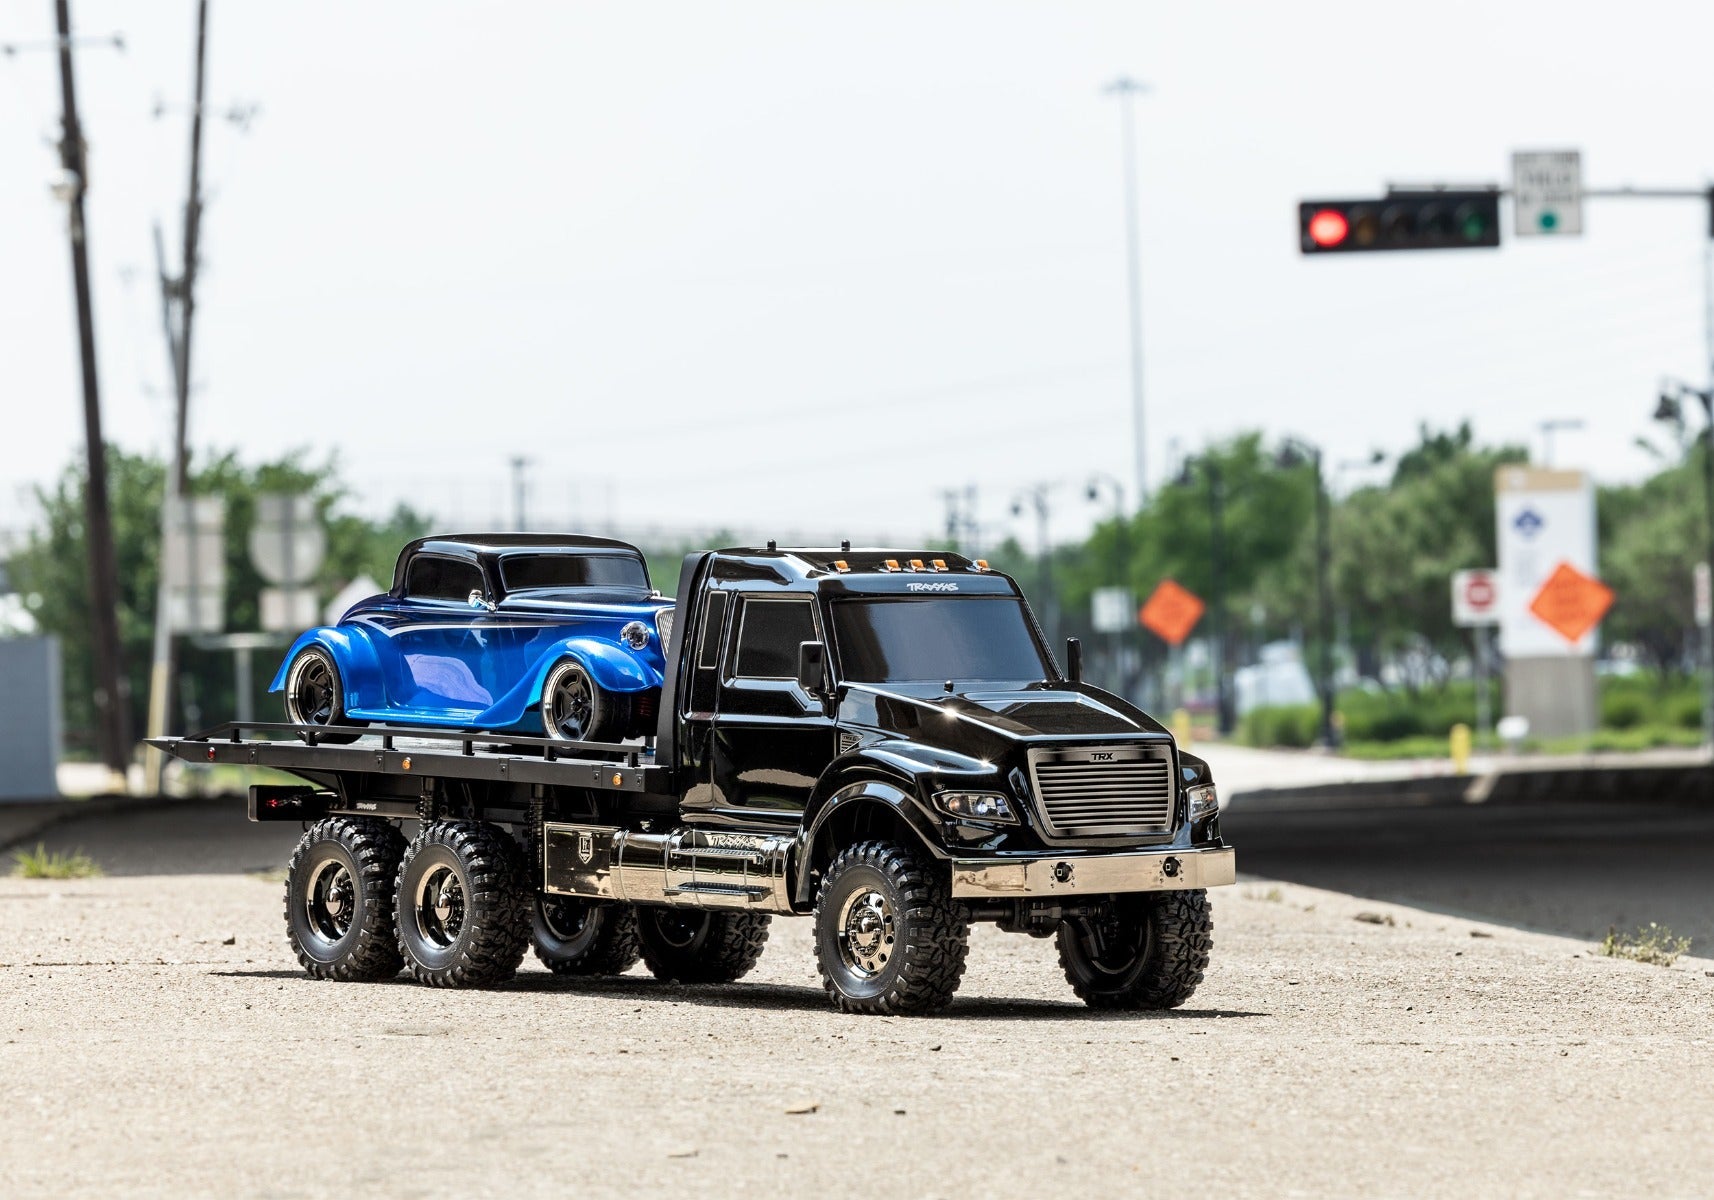 Traxxas TRX-6 RTR 1/10 6x6 Ultimate RC Hauler Flatbed Tow Truck w/ Pro Scale Winch